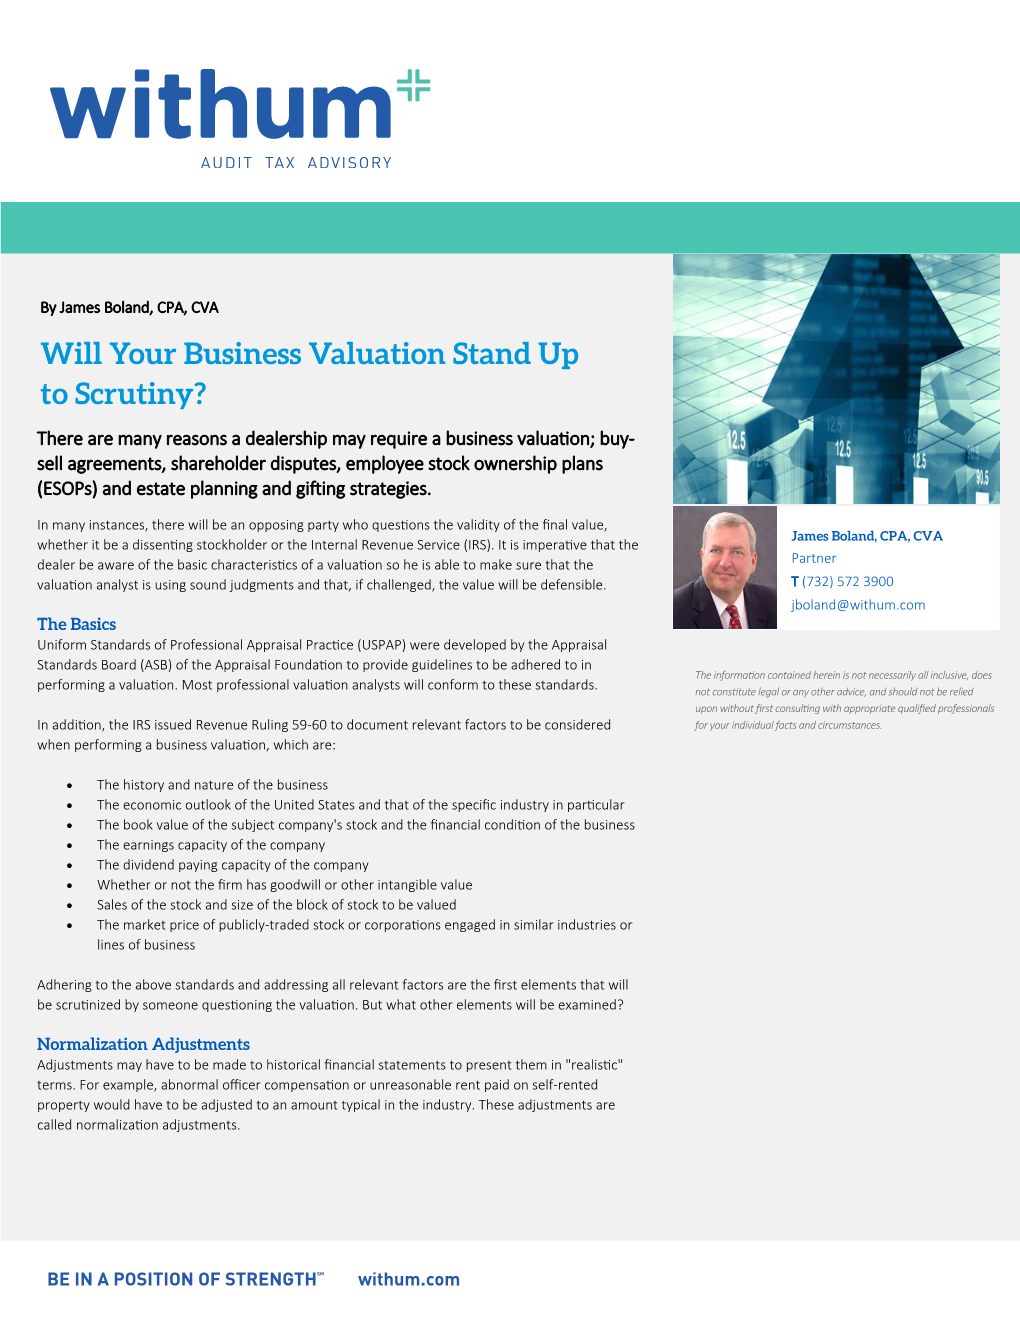 Will Your Business Valuation Stand up to Scrutiny?